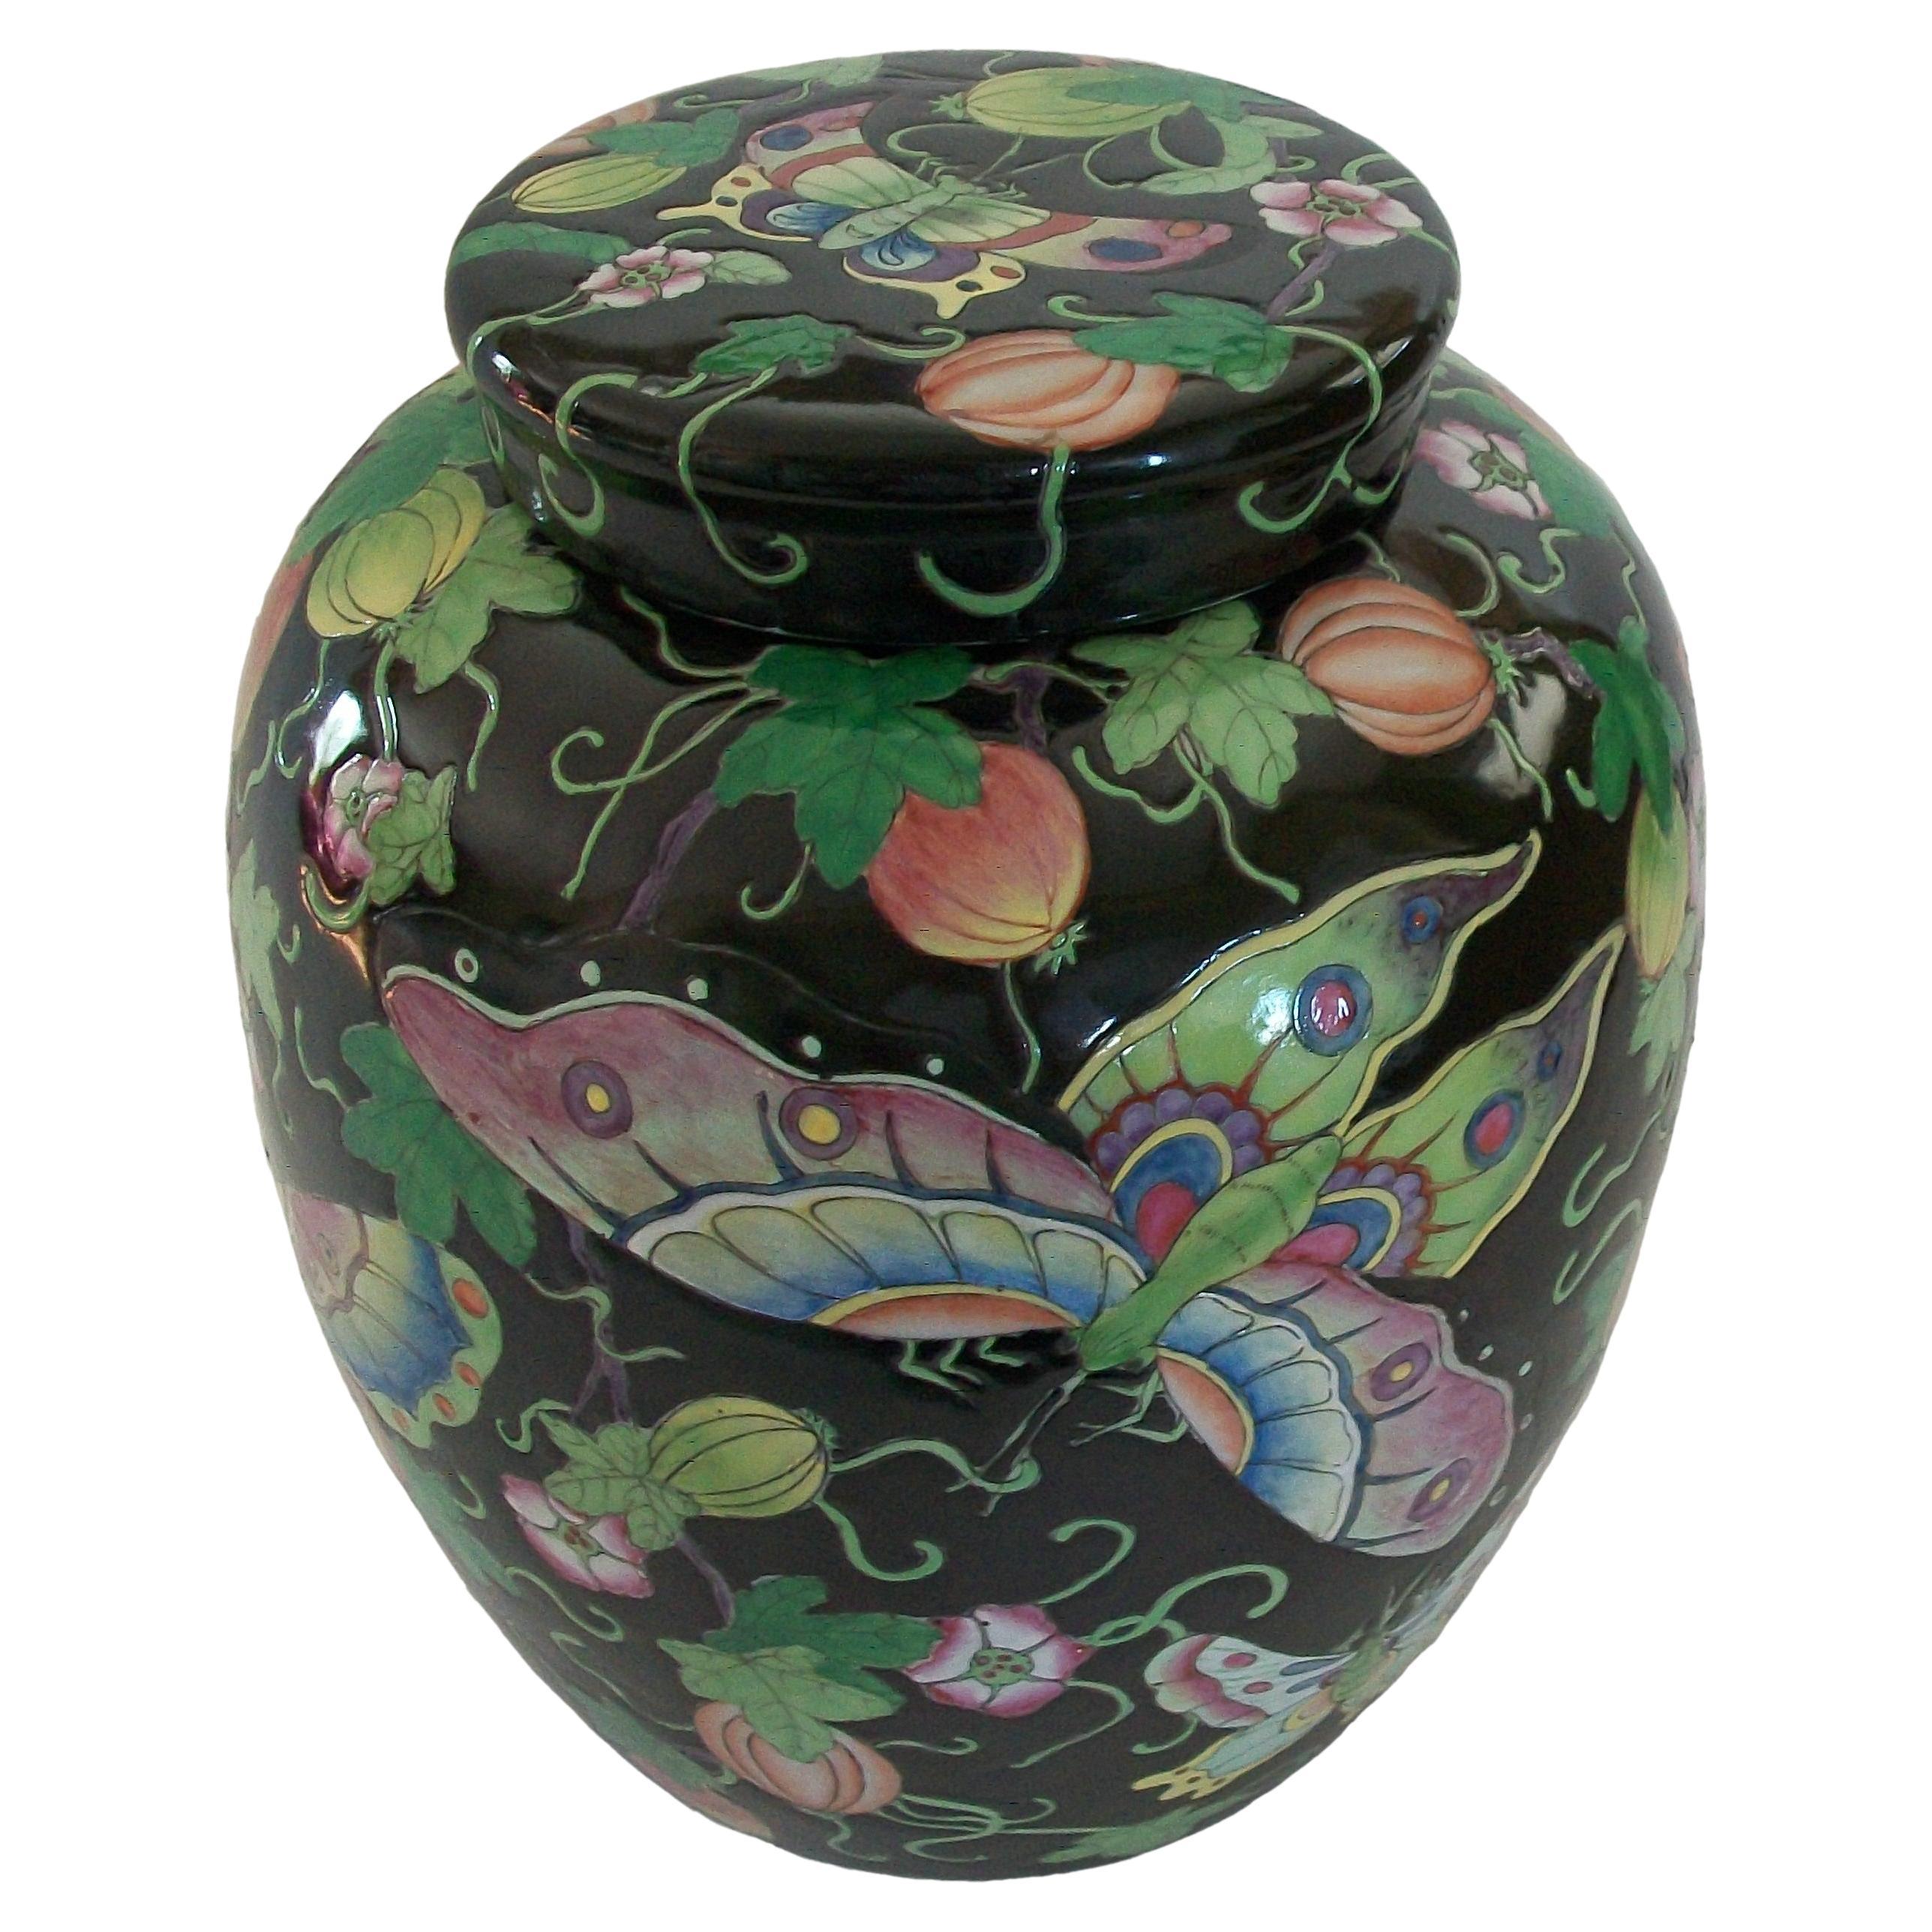 Antique Black Ground Famille Rose 'Butterfly' Ginger Jar, China, 19th Century